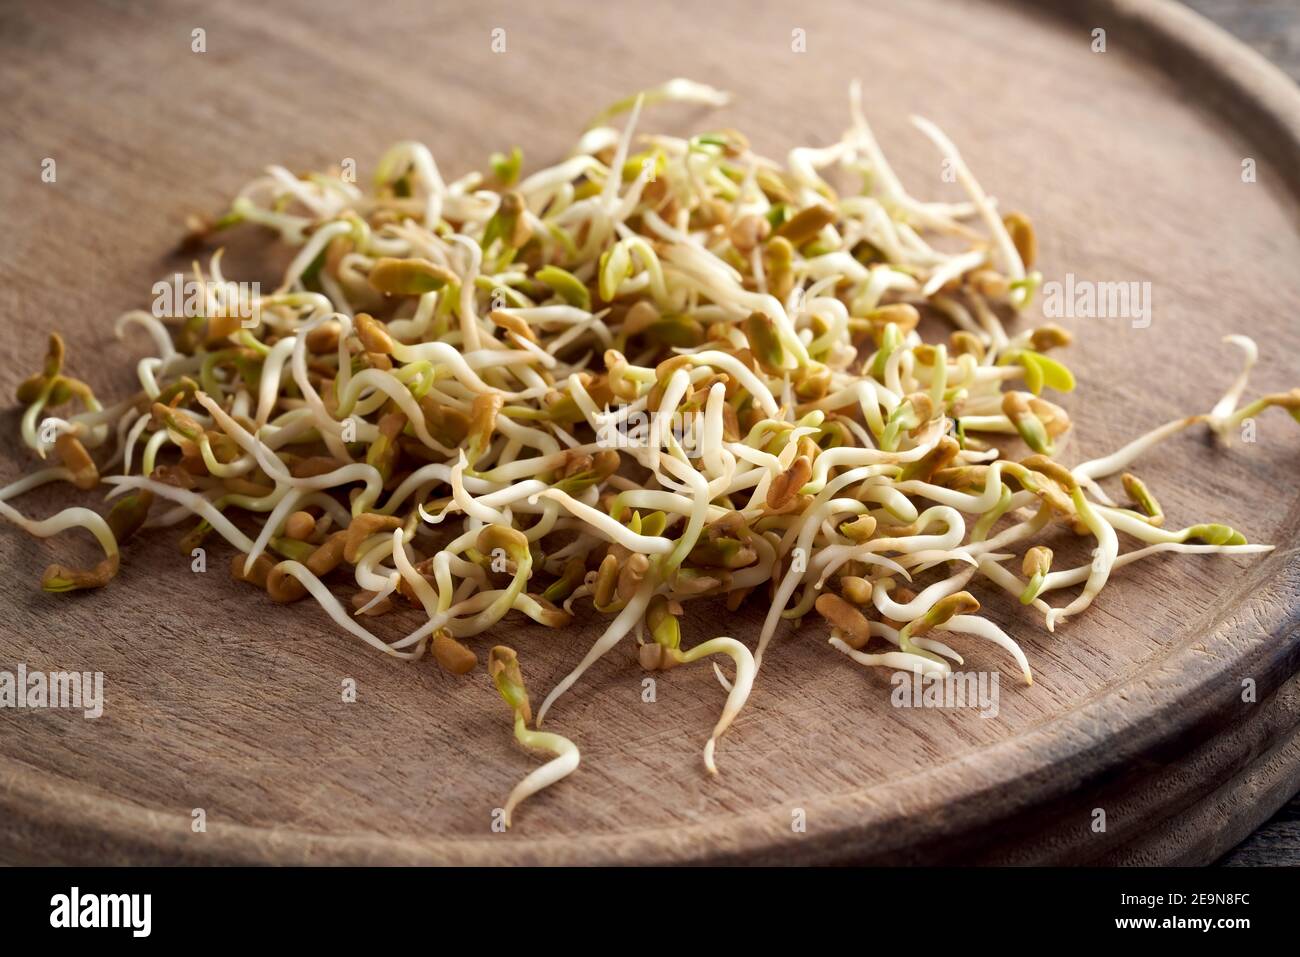 Fresh fenugreek sprouts on a wooden cutting board Stock Photo